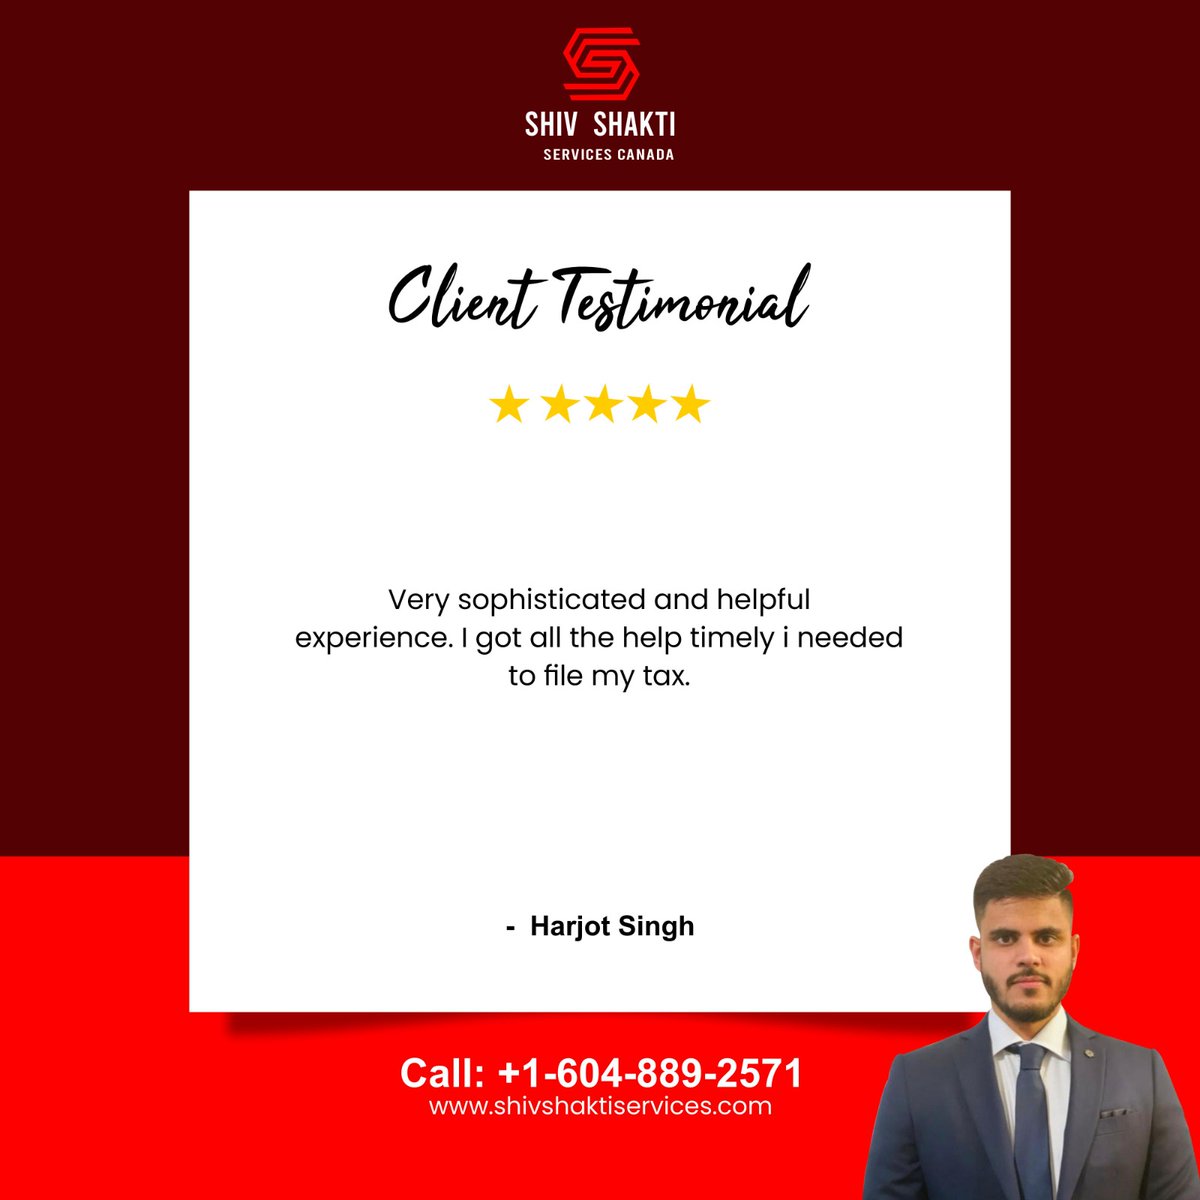 Have a look at the Client Testimonial for Shiv Shakti Services by Harjot Singh. 

Looking for the best Tax Filing Services in Surrey BC or nearby locations?
Call: +1-604-889-2571 

#ClientTestimonials #ShivShaktiServicesCanada #TaxFilingCanada #ClientDiaries #TaxFilingServices